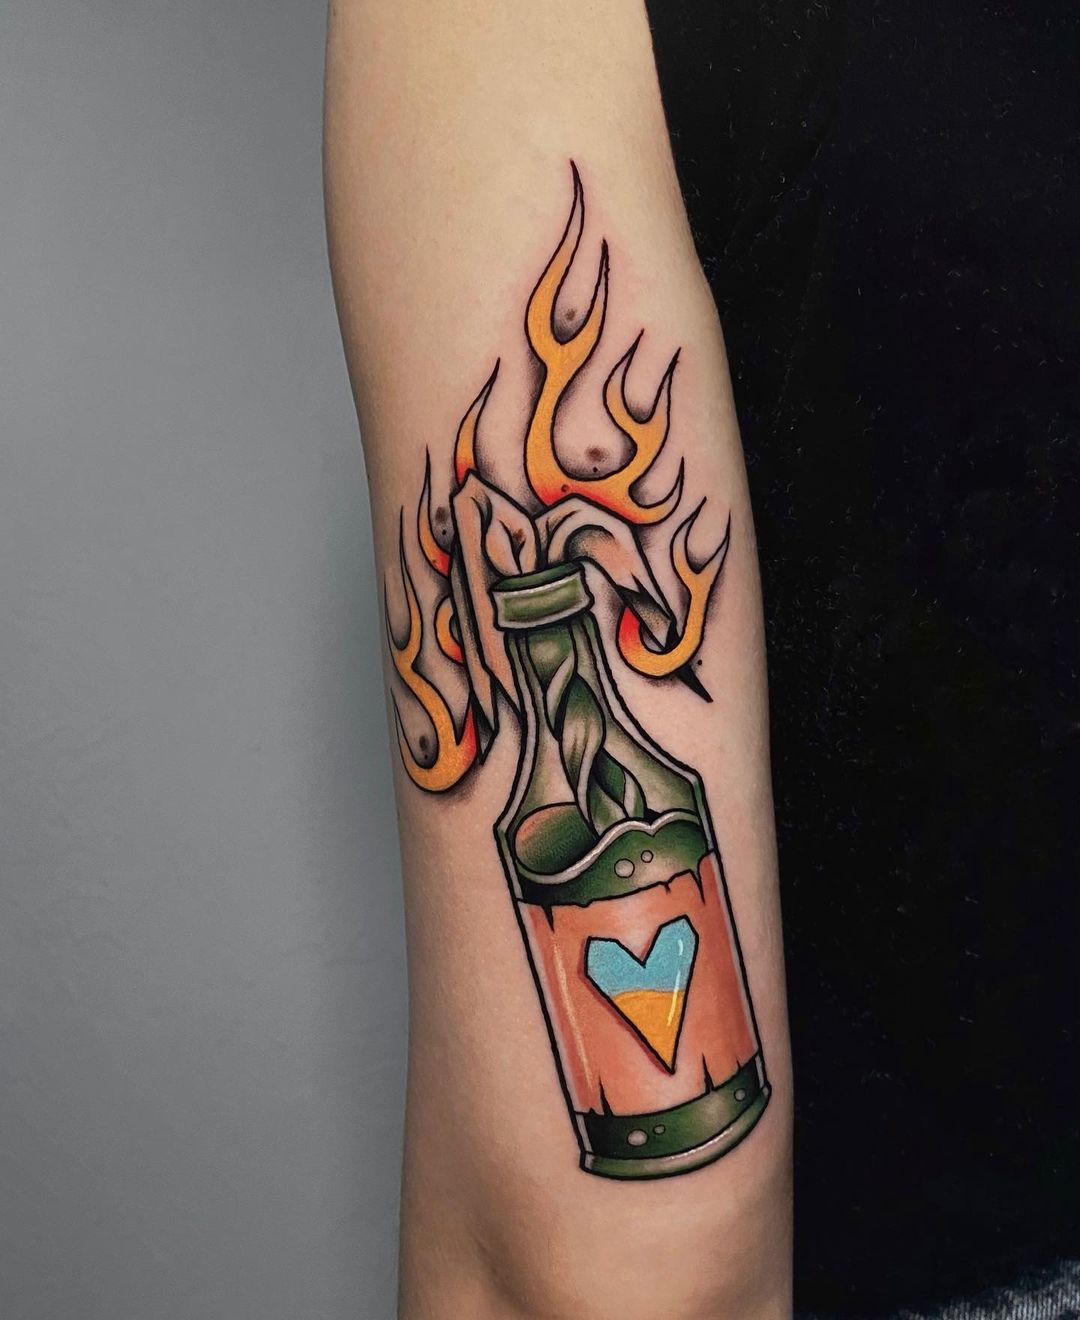 Blackwork molotov cocktail My 3rd professional tattoo Ive gotten   done by Mike Olson at Red Yeti Ironworks in Longview WA  rtattoos